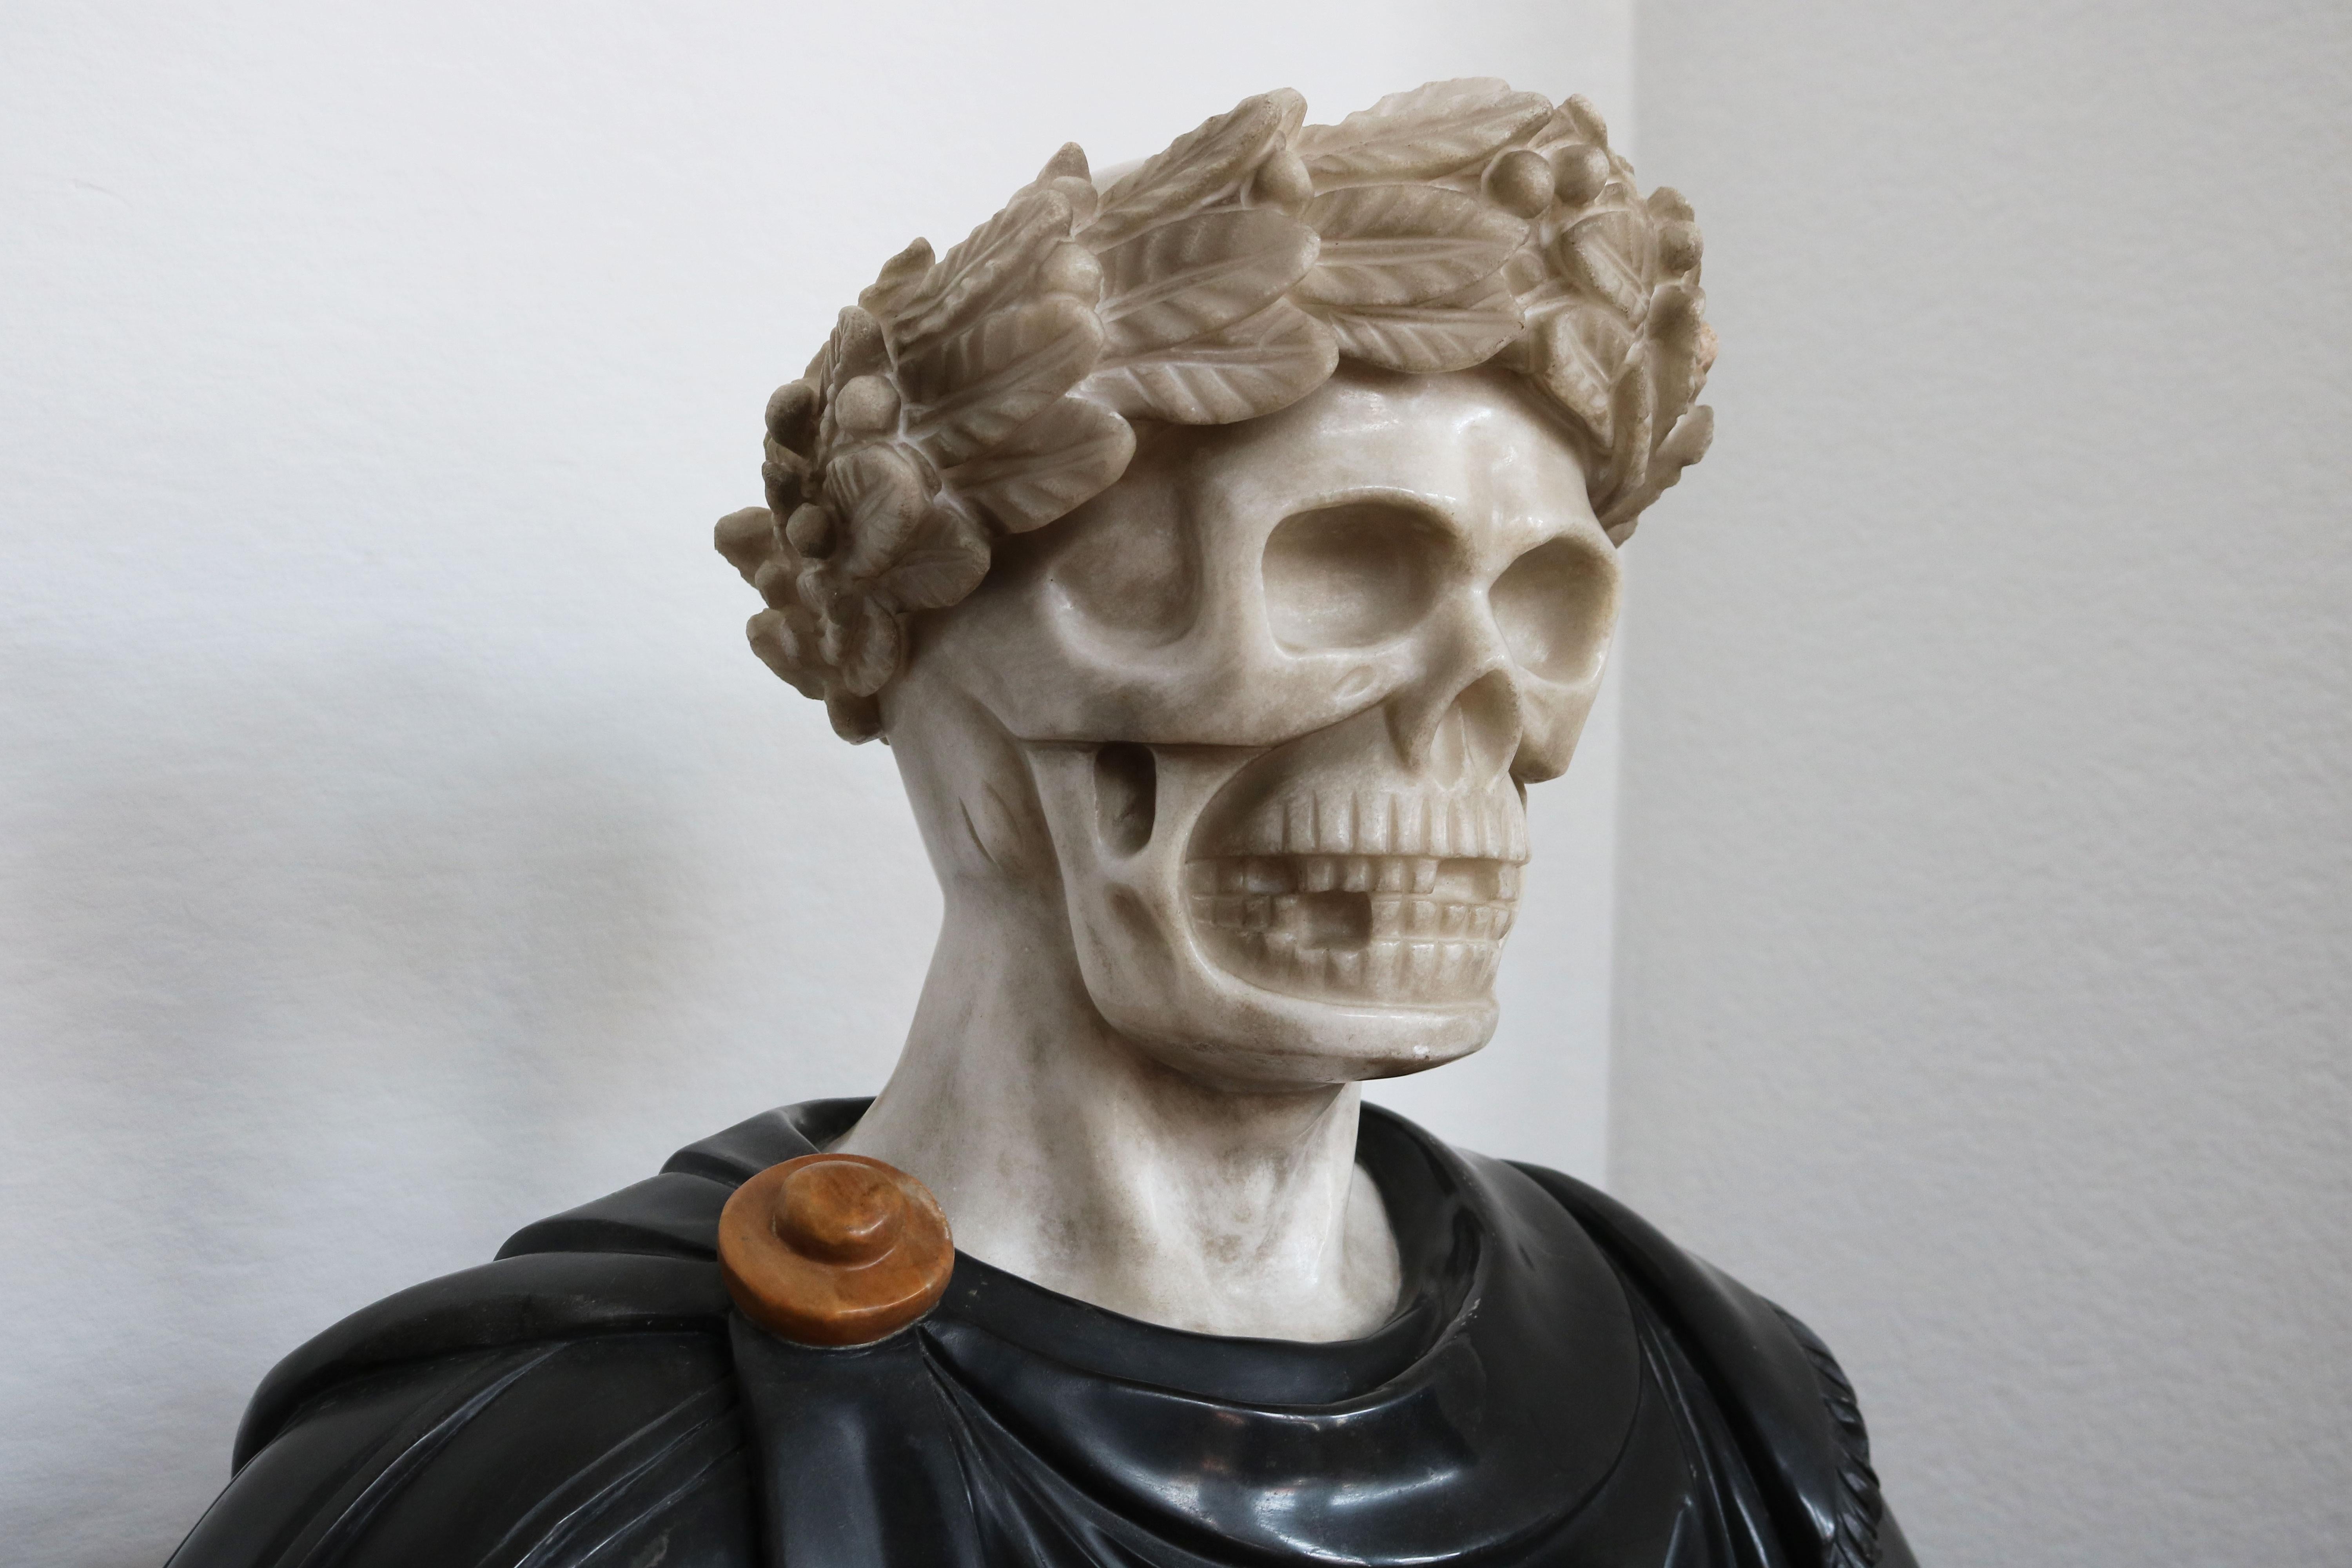 Masterfully carved & most impressive Italian Vanitas bust in solid marble from late 19th century. 
White Carrara marble skull combined with a Belgian Black marble Roman toga (robe). 
The roman toga shows gorgeous detail like curves / folds in the